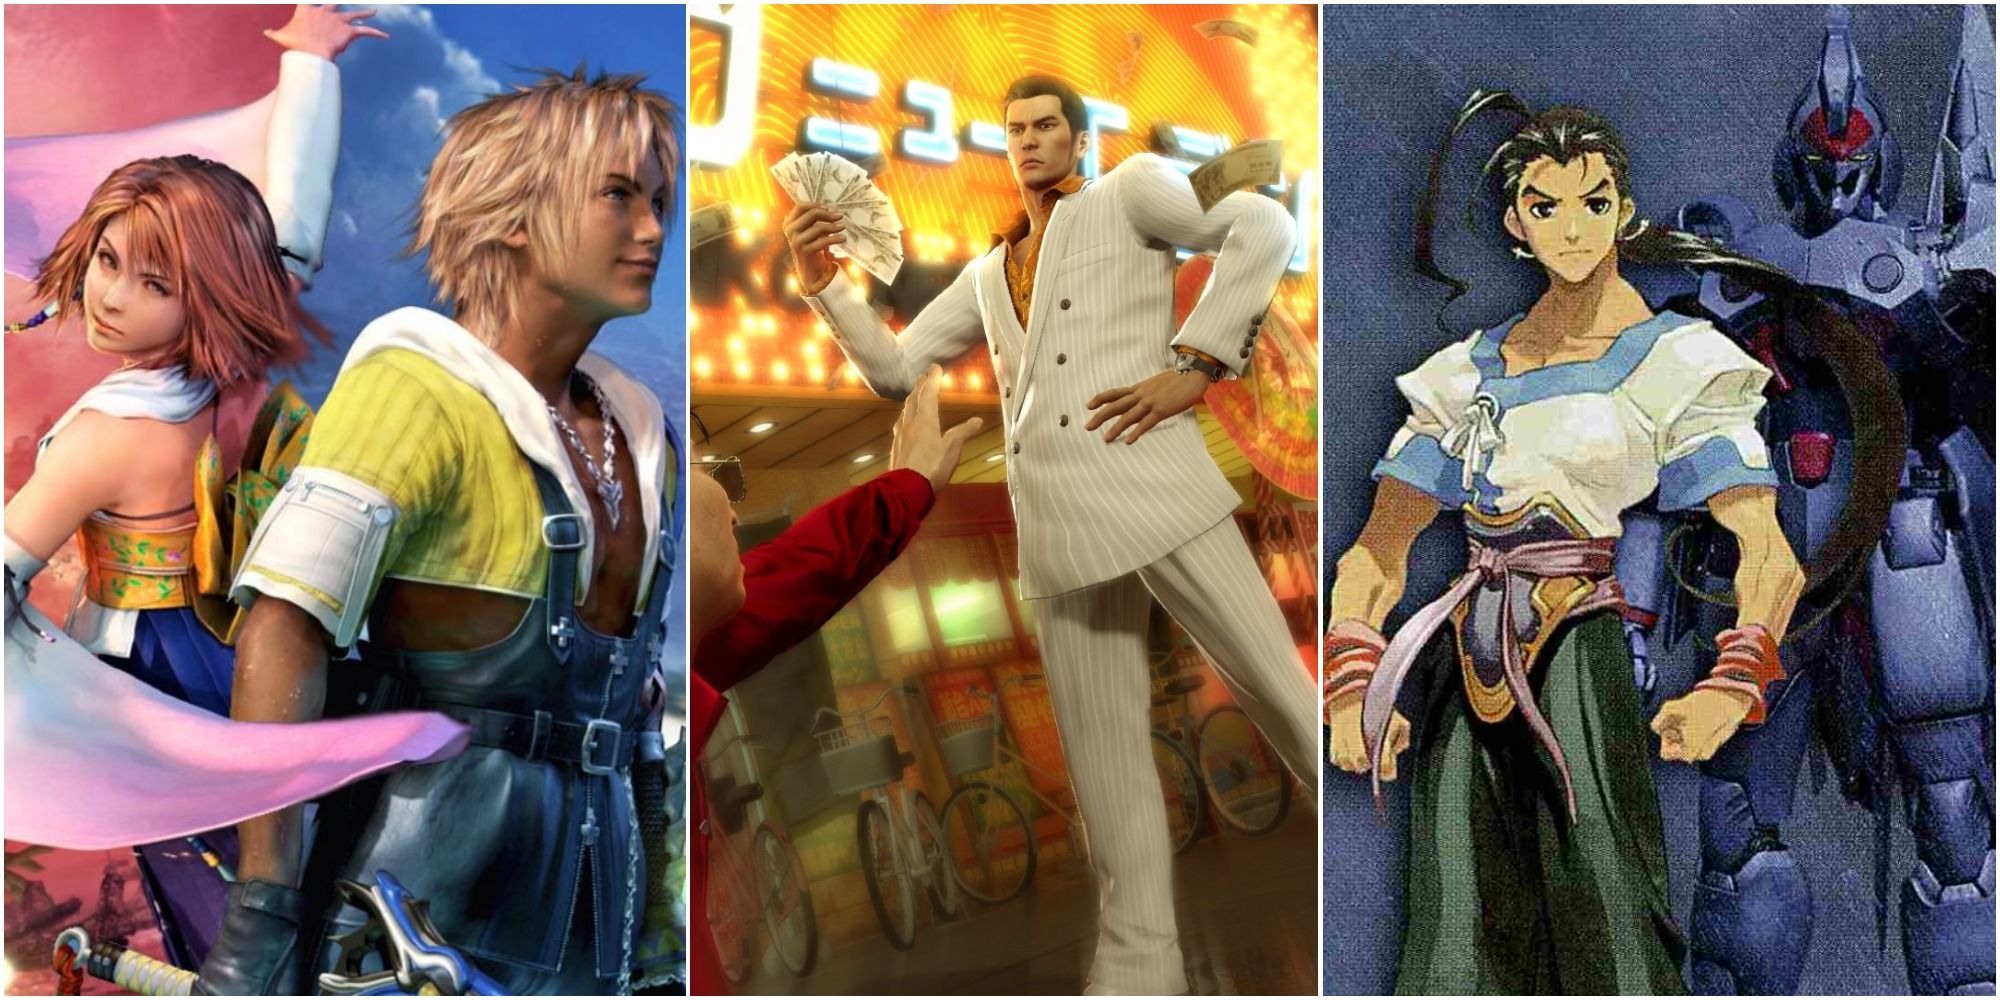 The 10 Most Iconic JRPG Protagonists, Ranked